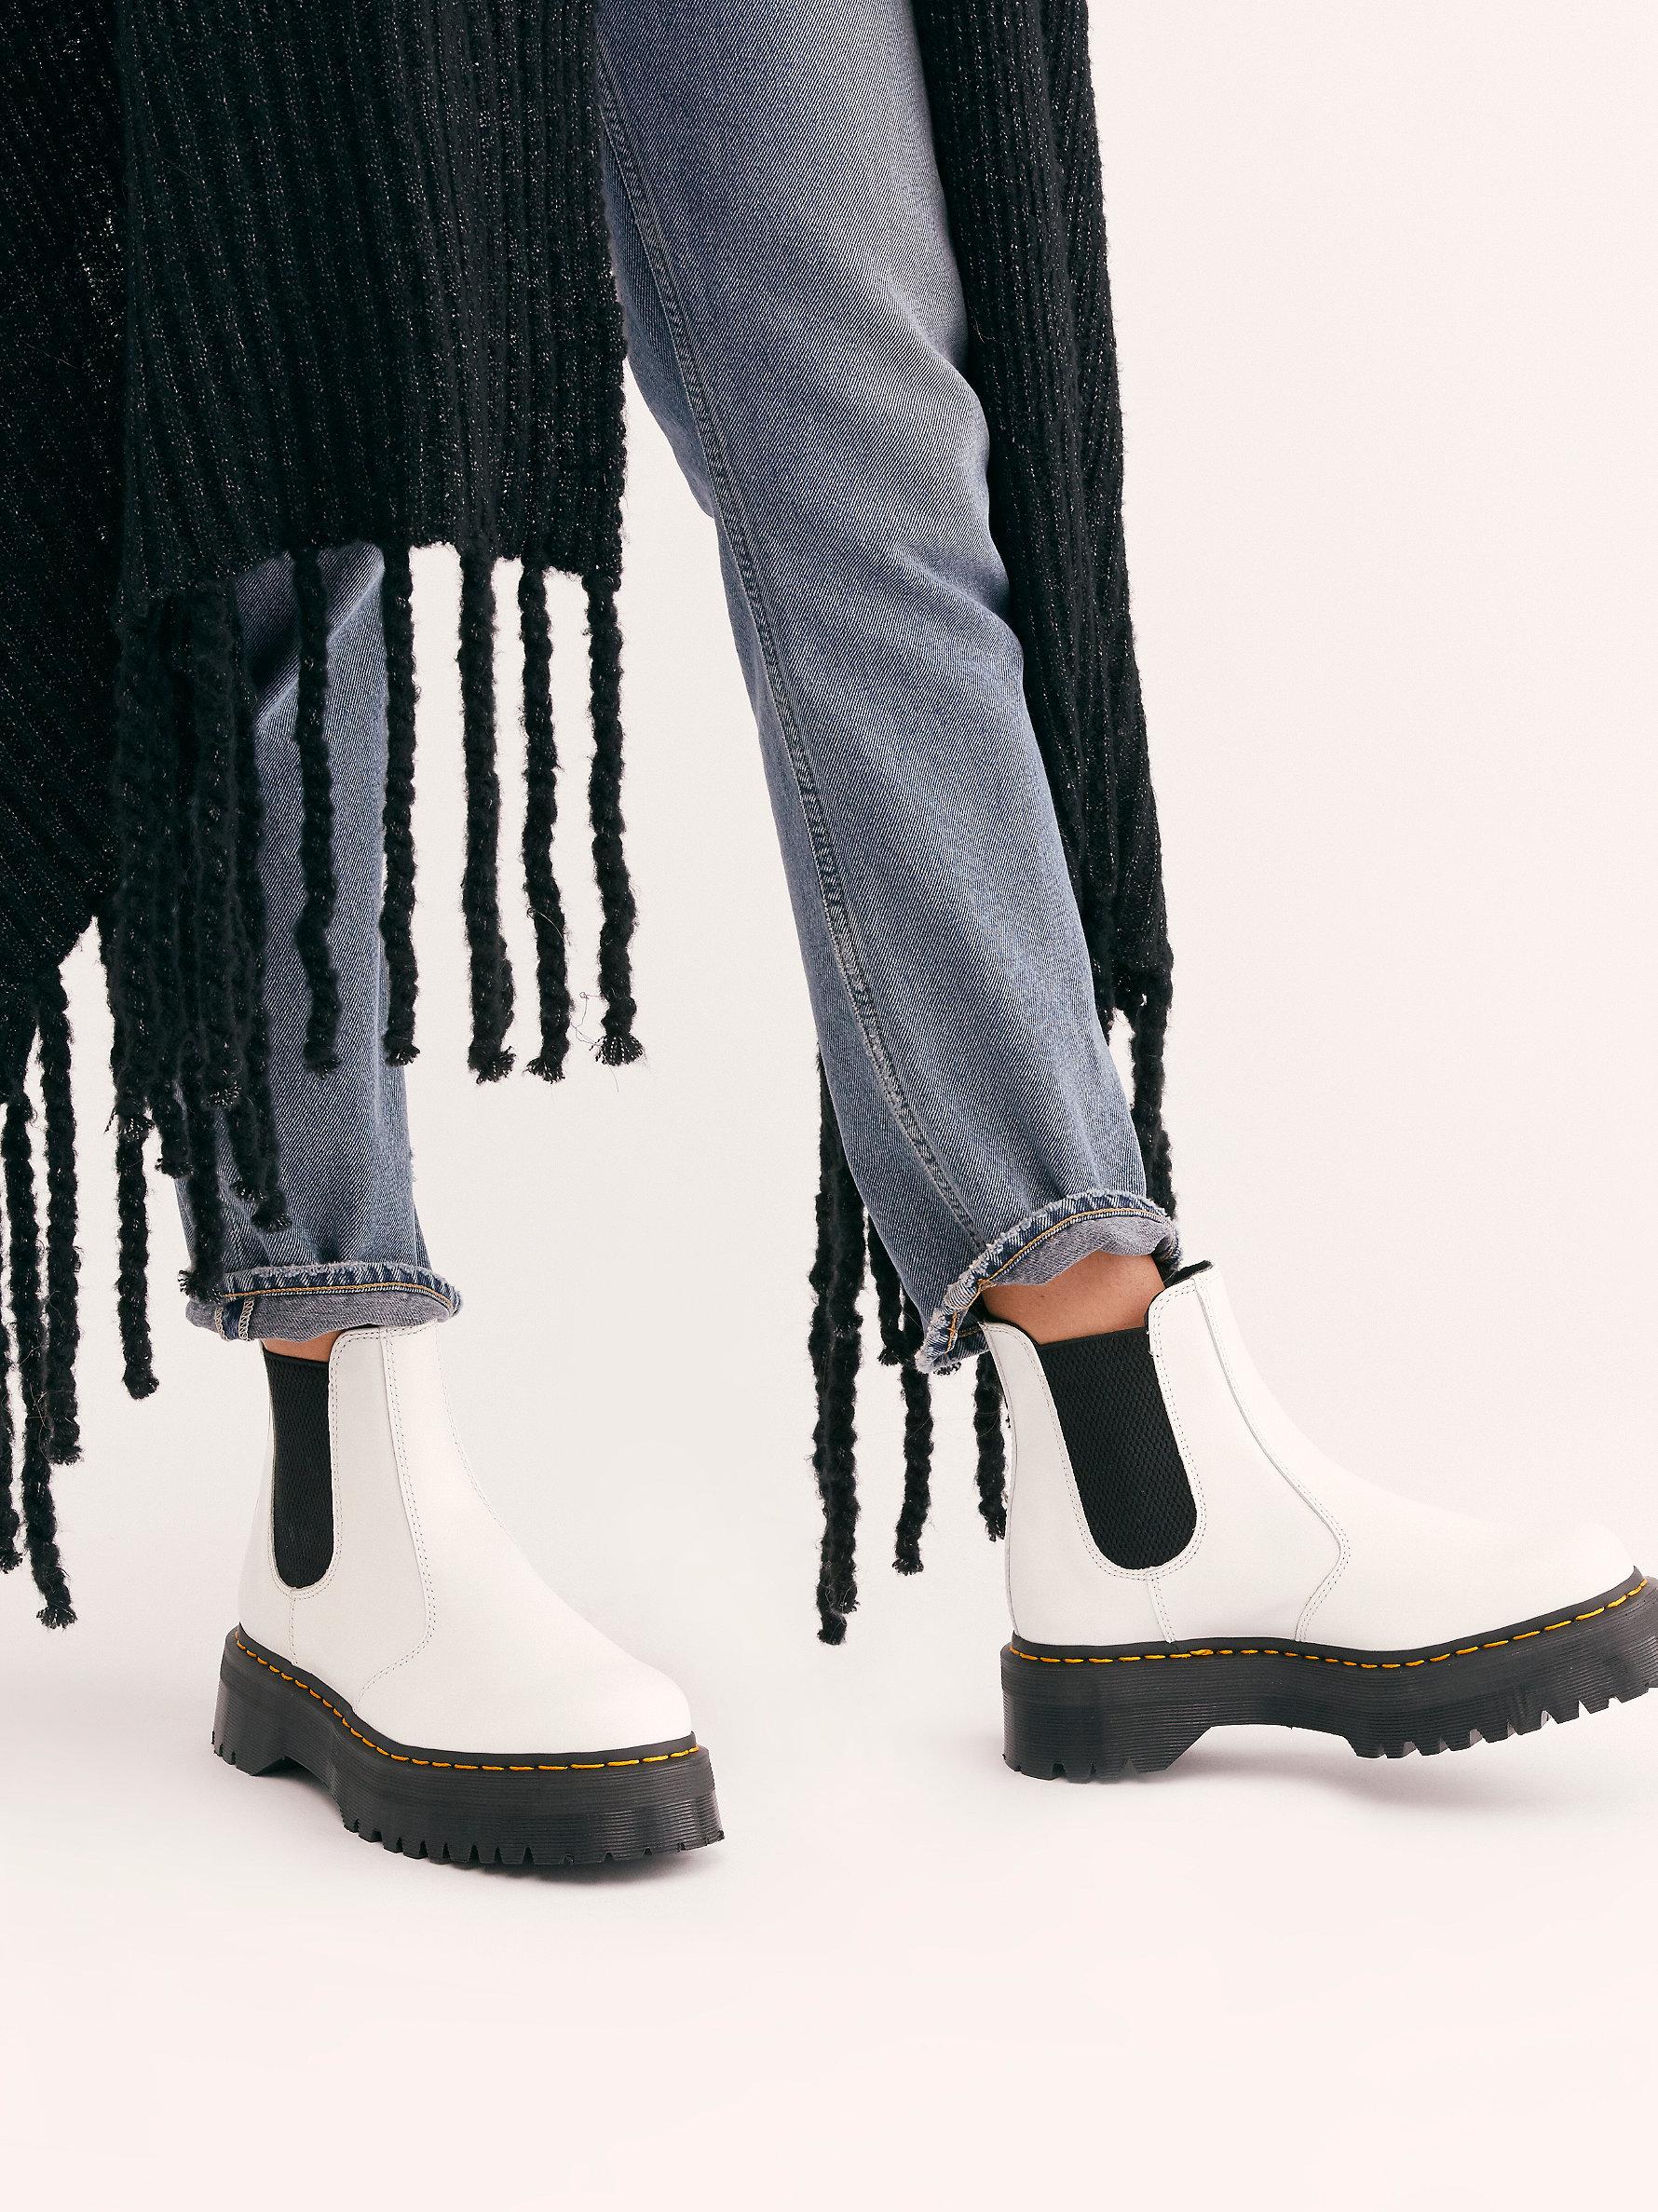 Free People Leather Dr. Martens 2976 Quad Chelsea Boots in White - Lyst